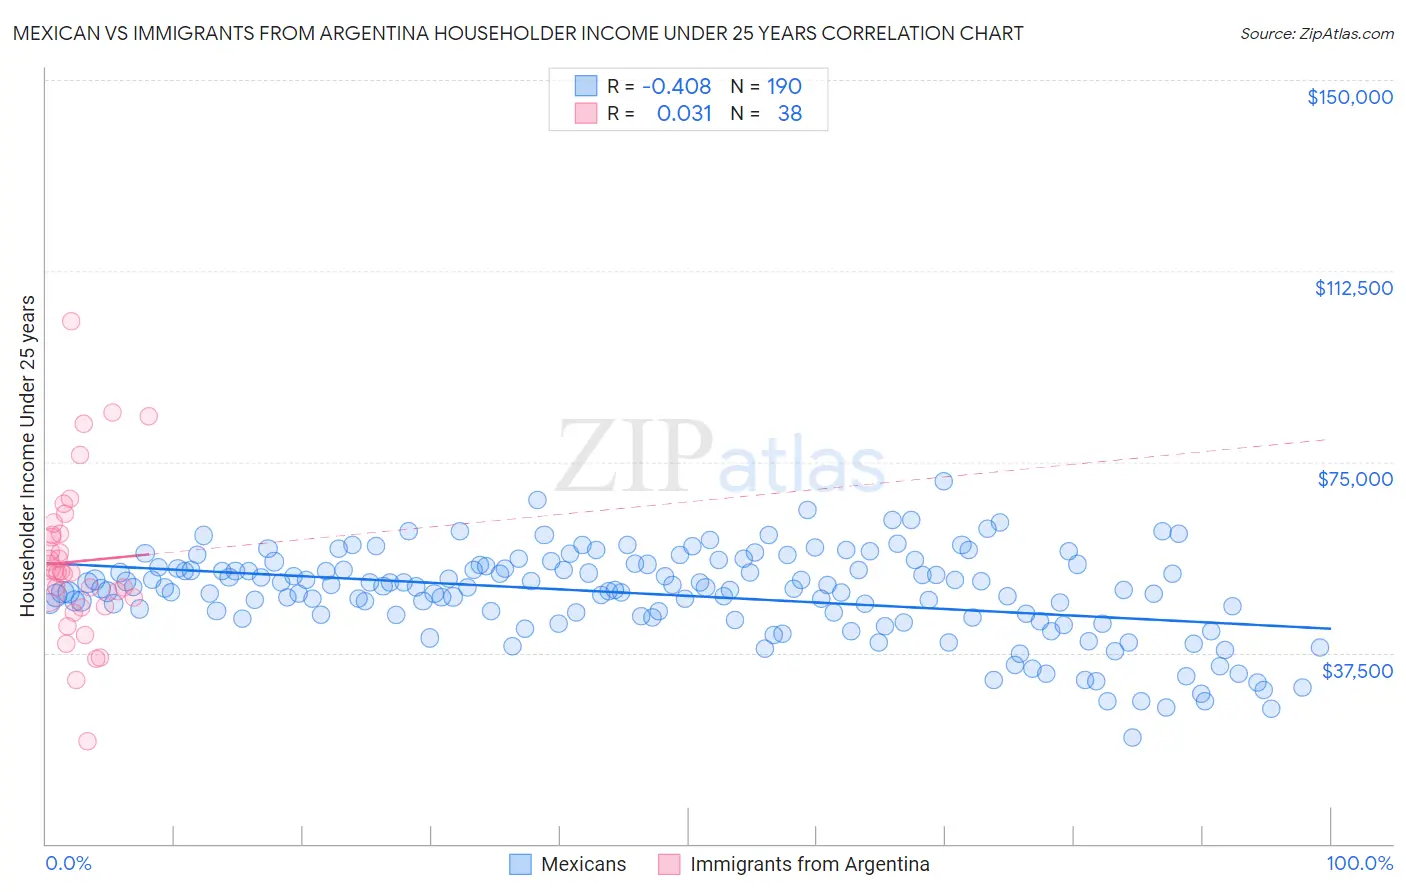 Mexican vs Immigrants from Argentina Householder Income Under 25 years